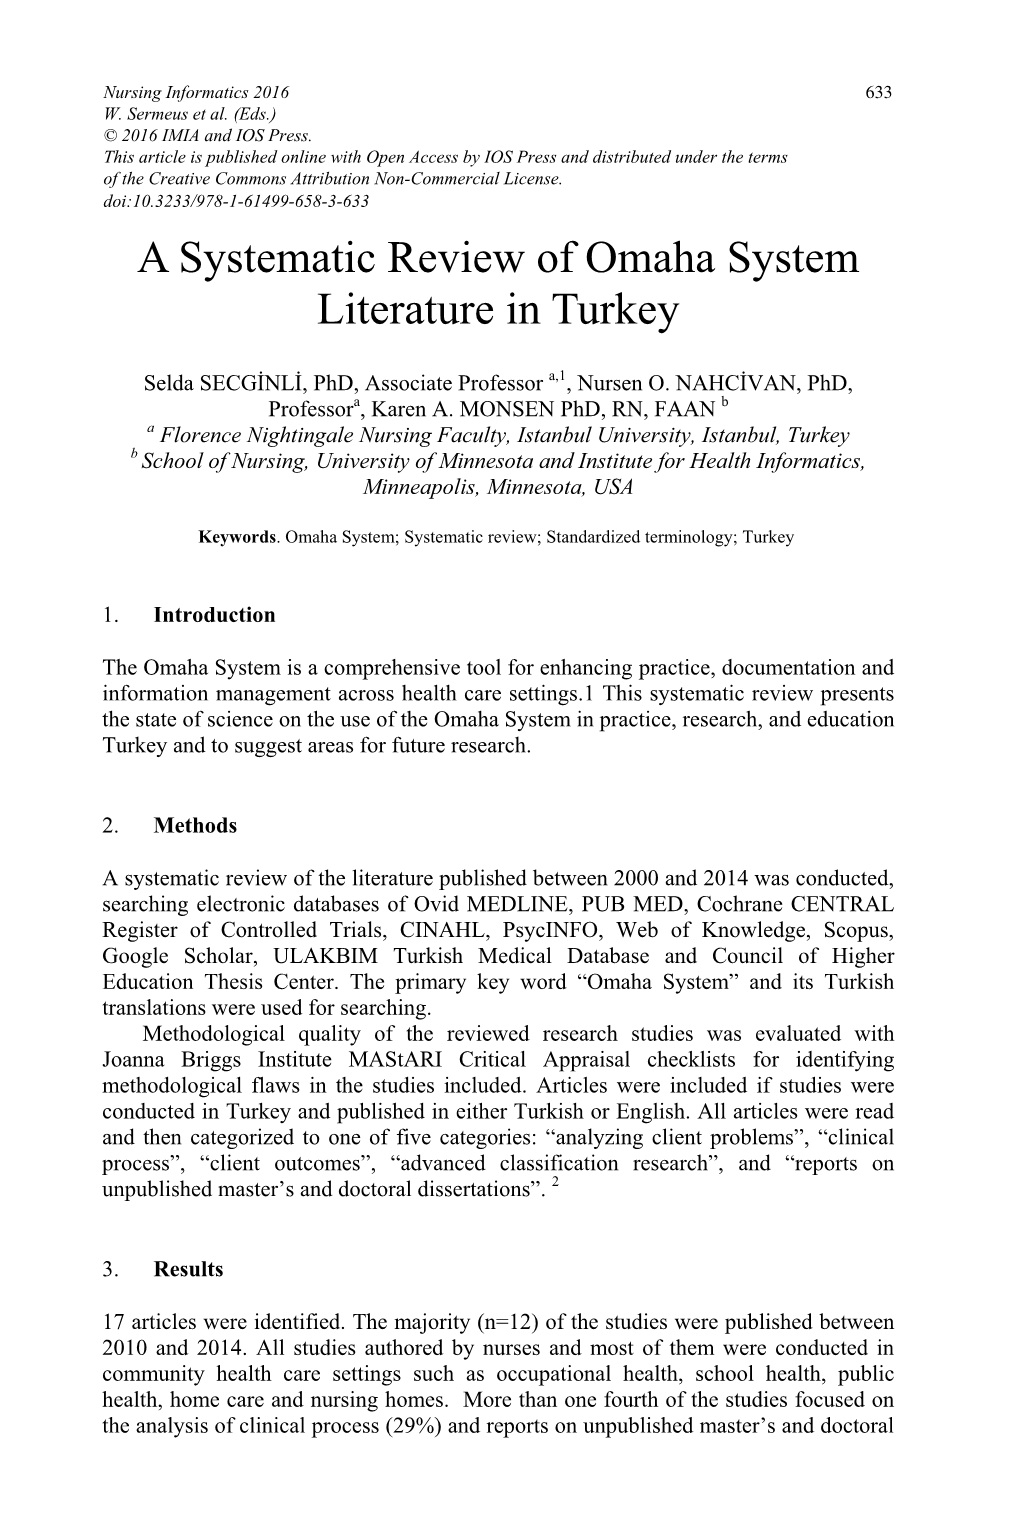 A Systematic Review of Omaha System Literature in Turkey